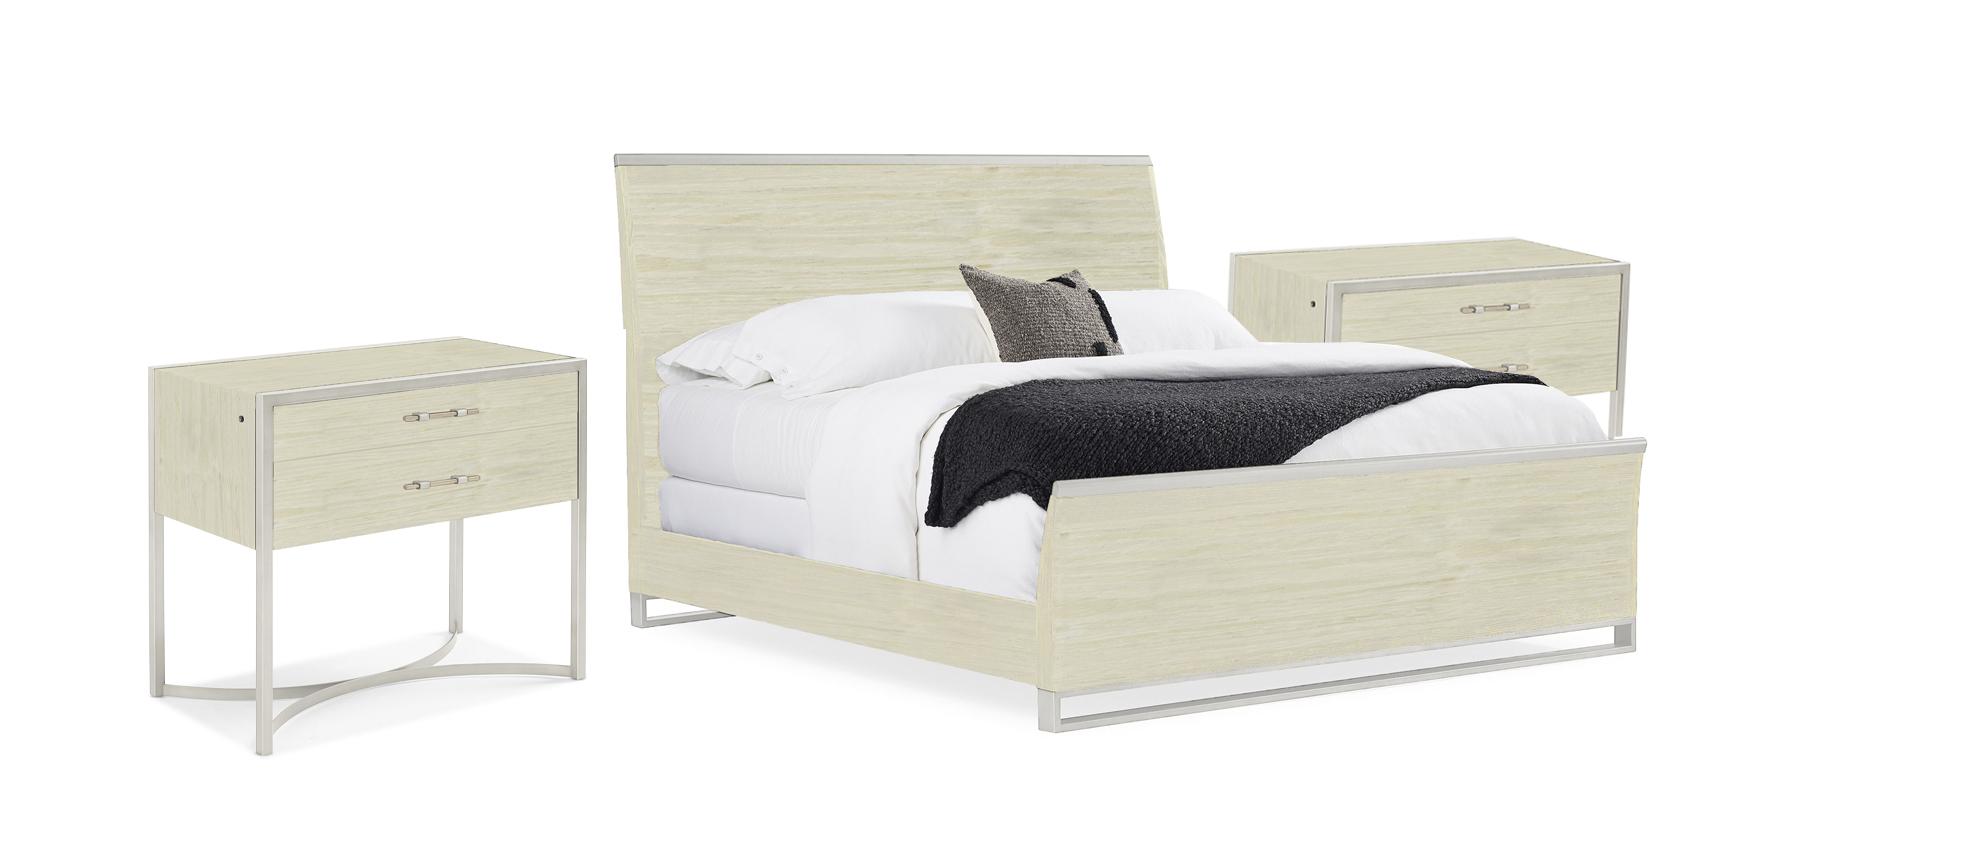 Contemporary Sleigh Bedroom Set REMIX WOOD BED / REMIX LARGE NIGHTSTAND M113-019-124-Set-3 in Pearl 